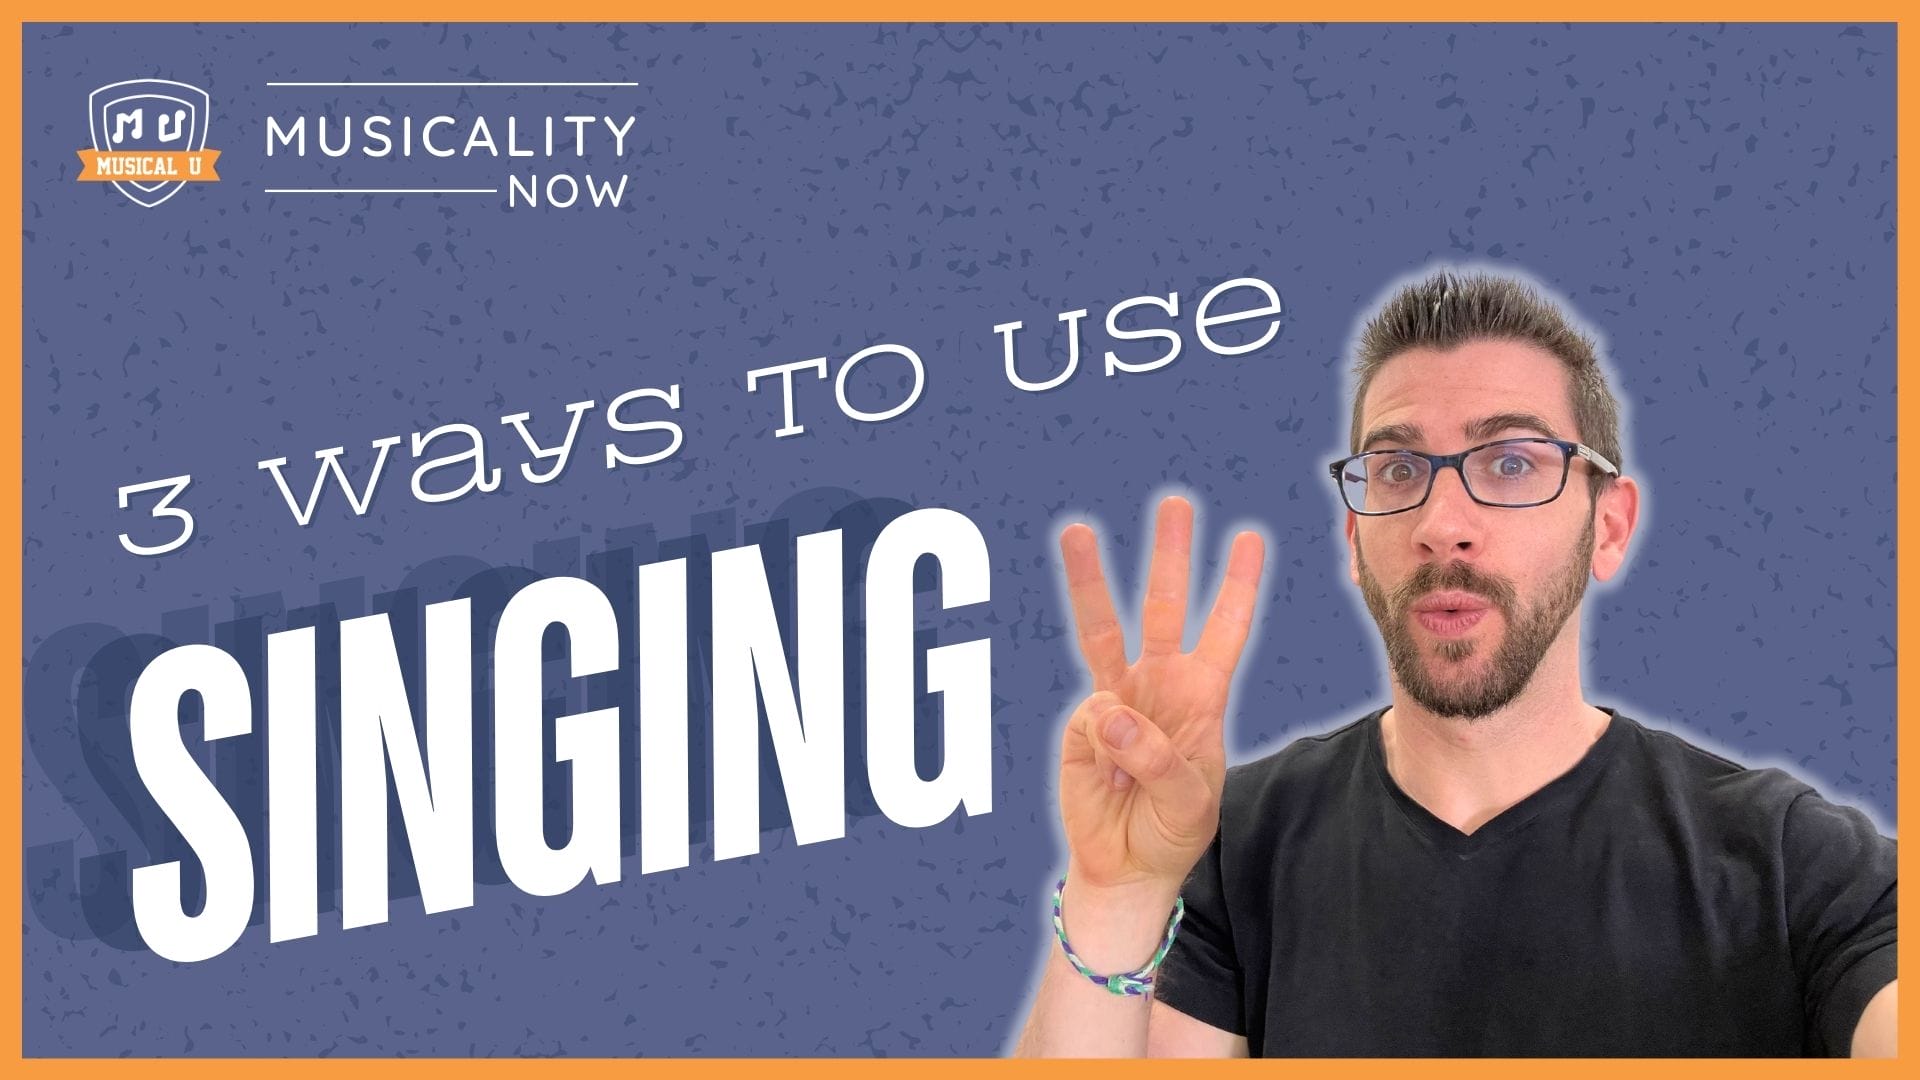 3 Ways To Use Singing In Your Daily Music Practice